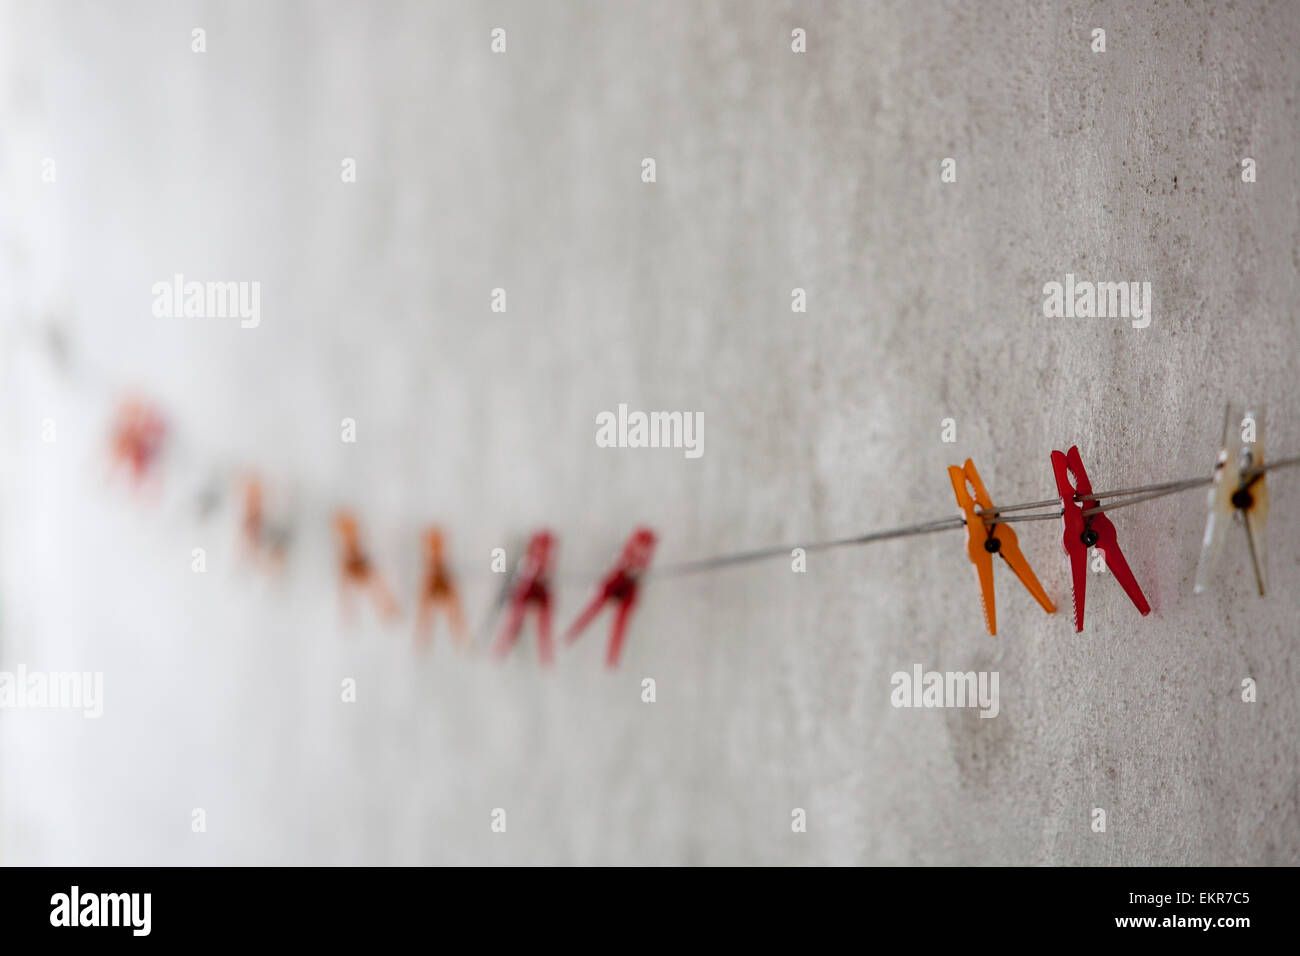 Coloured plastic clothes pegs on a washing line against a whitewashed wall. Stock Photo